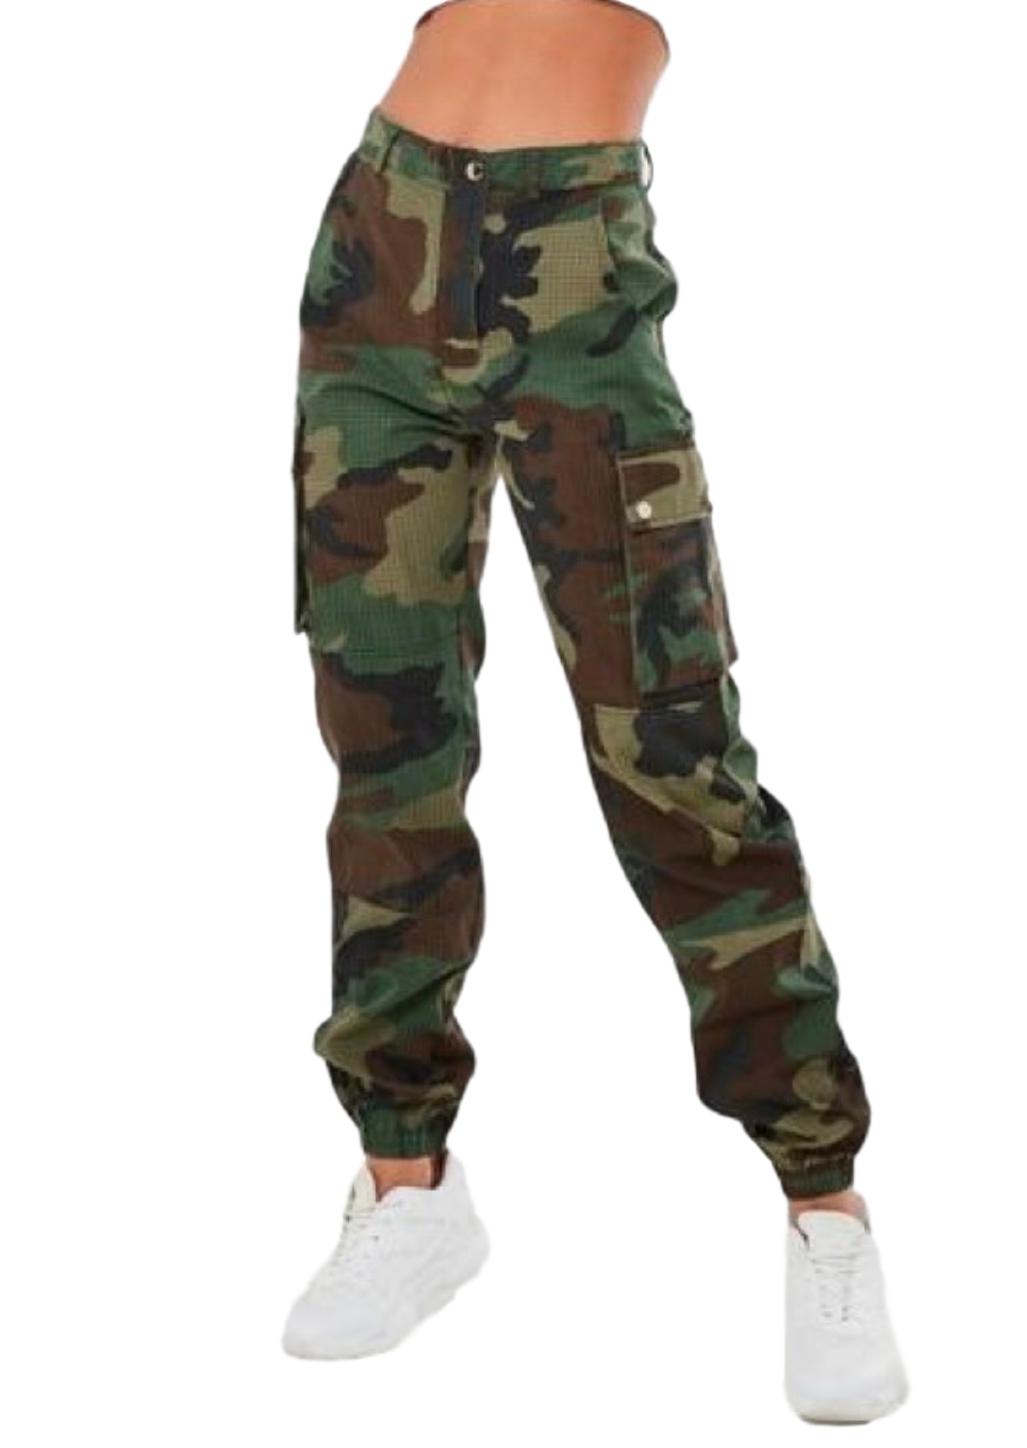 Buy huichang Small Purple Casual Women Sports Camo Cargo Pants Outdoor Camouflage  Trousers Jeans at Amazon.in